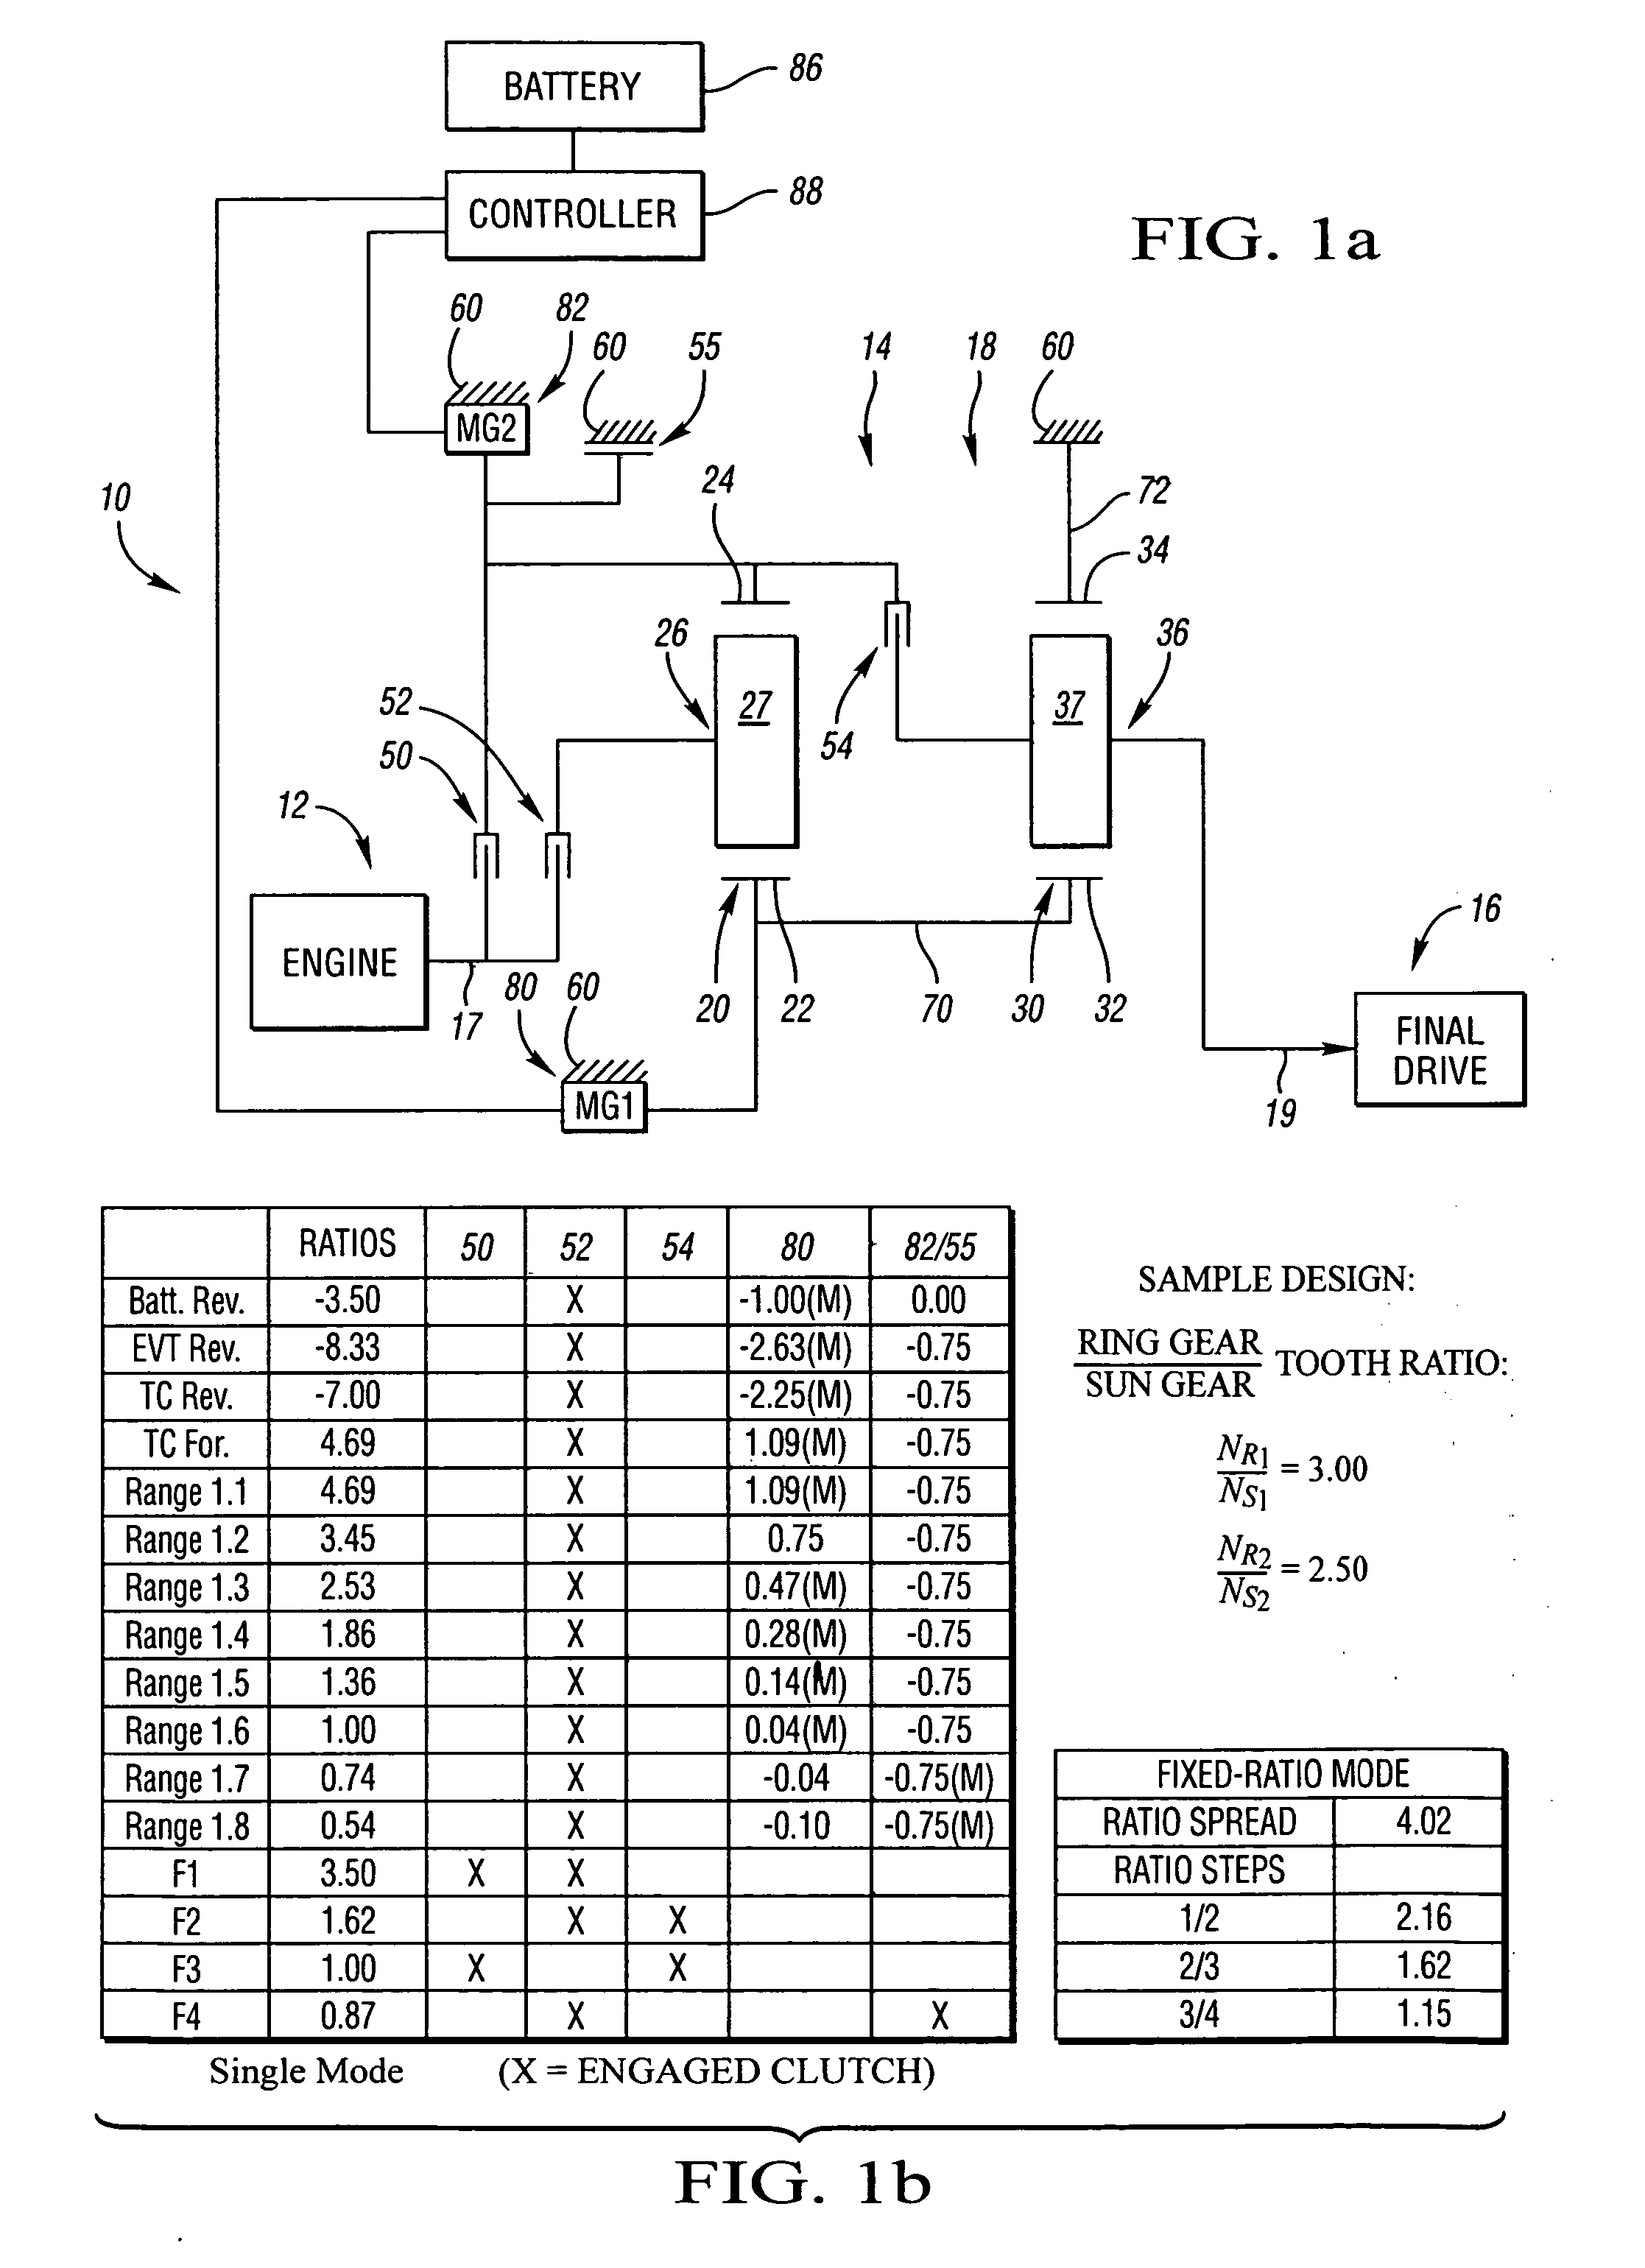 Electrically variable transmission having two planetary gear sets with one fixed interconnection and a stationary member